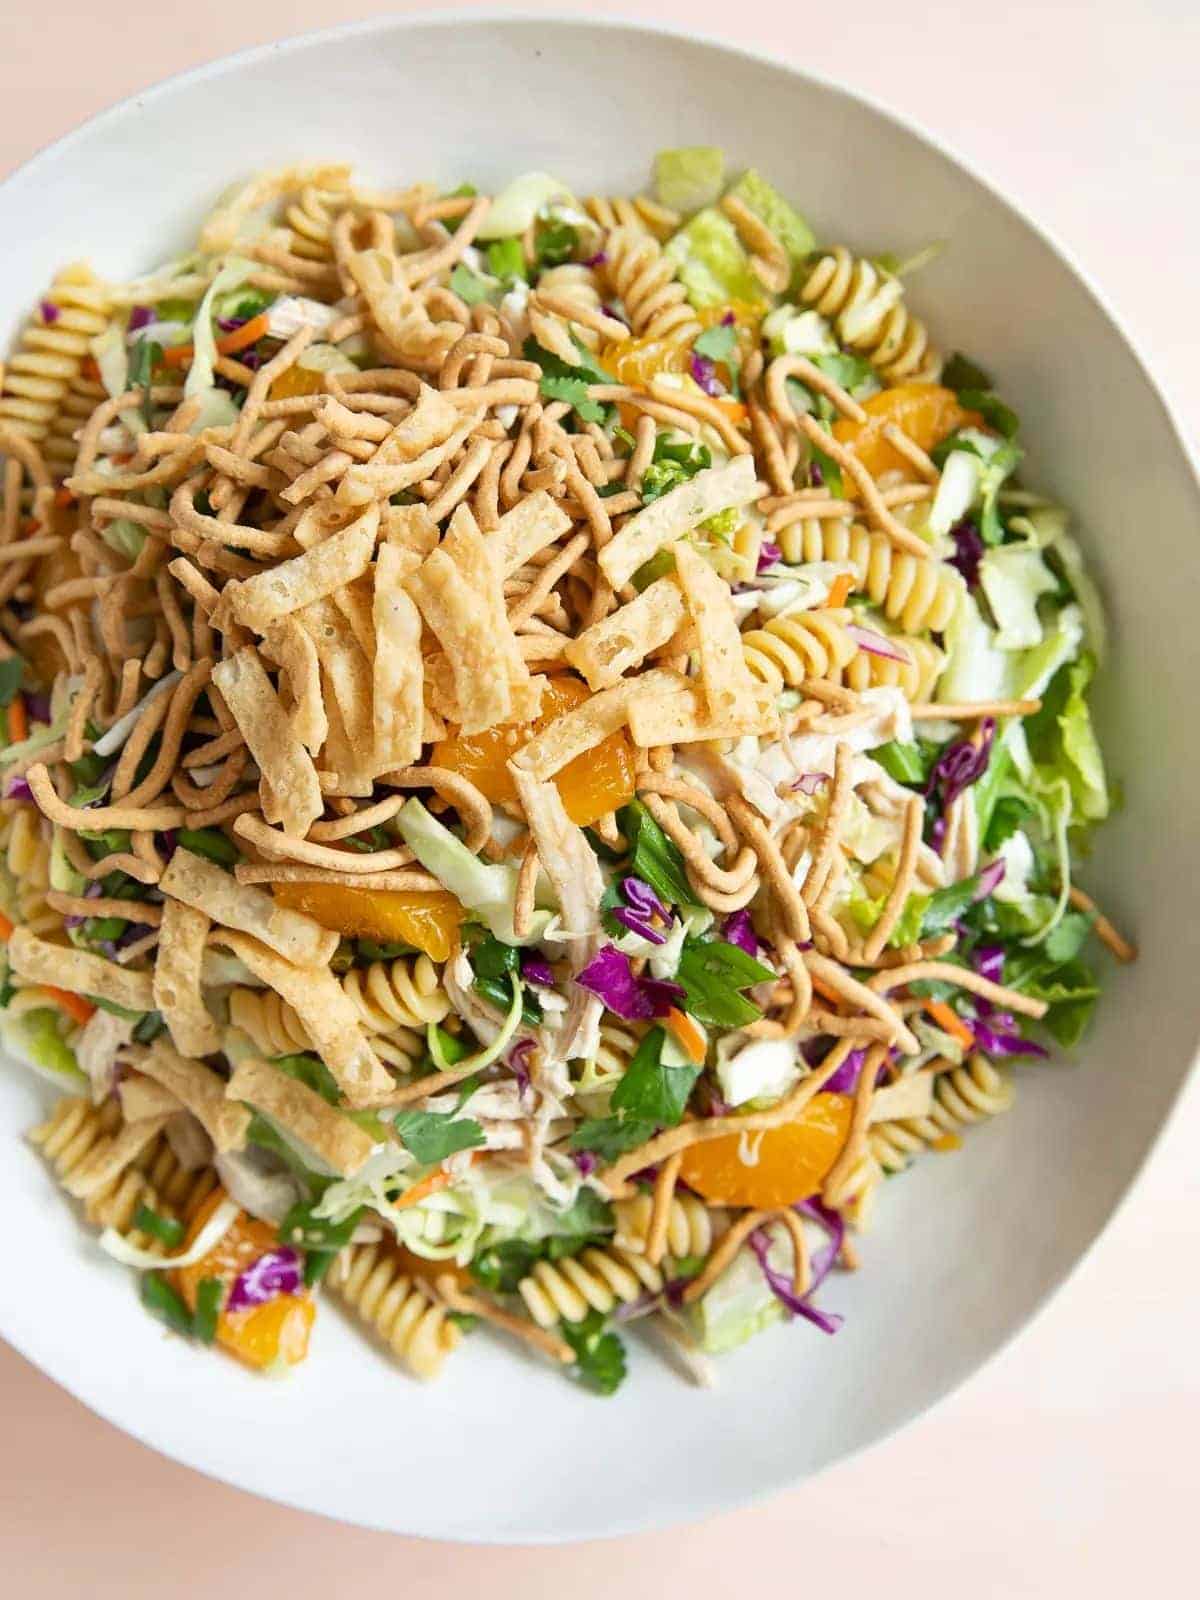 Chinese chicken pasta salad in a white bowl